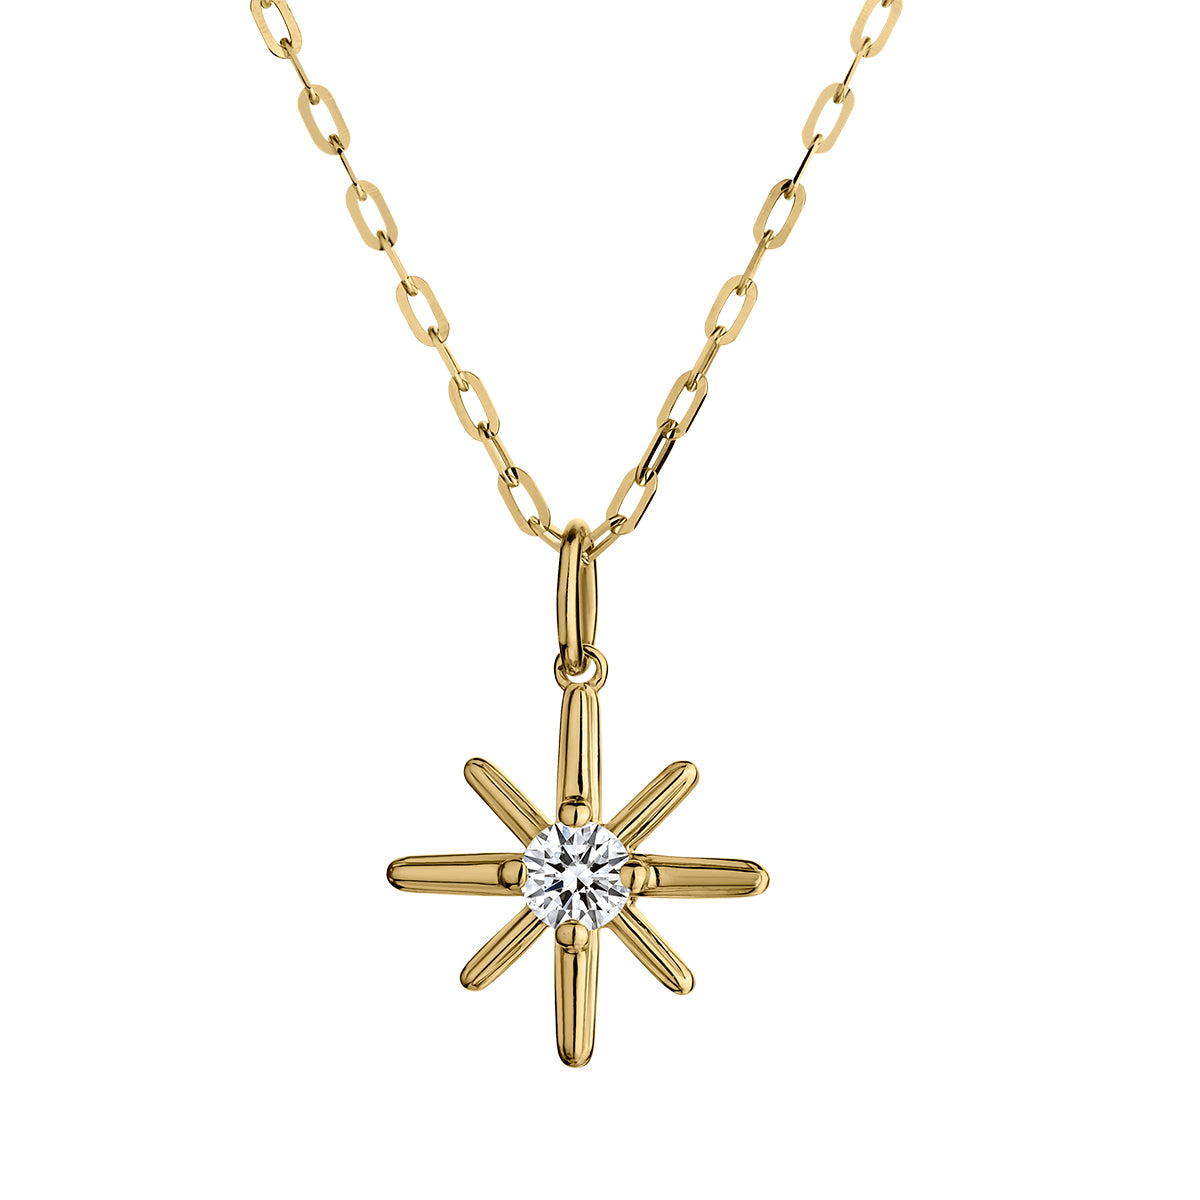 .25 Carat Diamond Star Pendant,  10kt Yellow Gold. Necklaces and Pendants. Griffin Jewellery Designs.